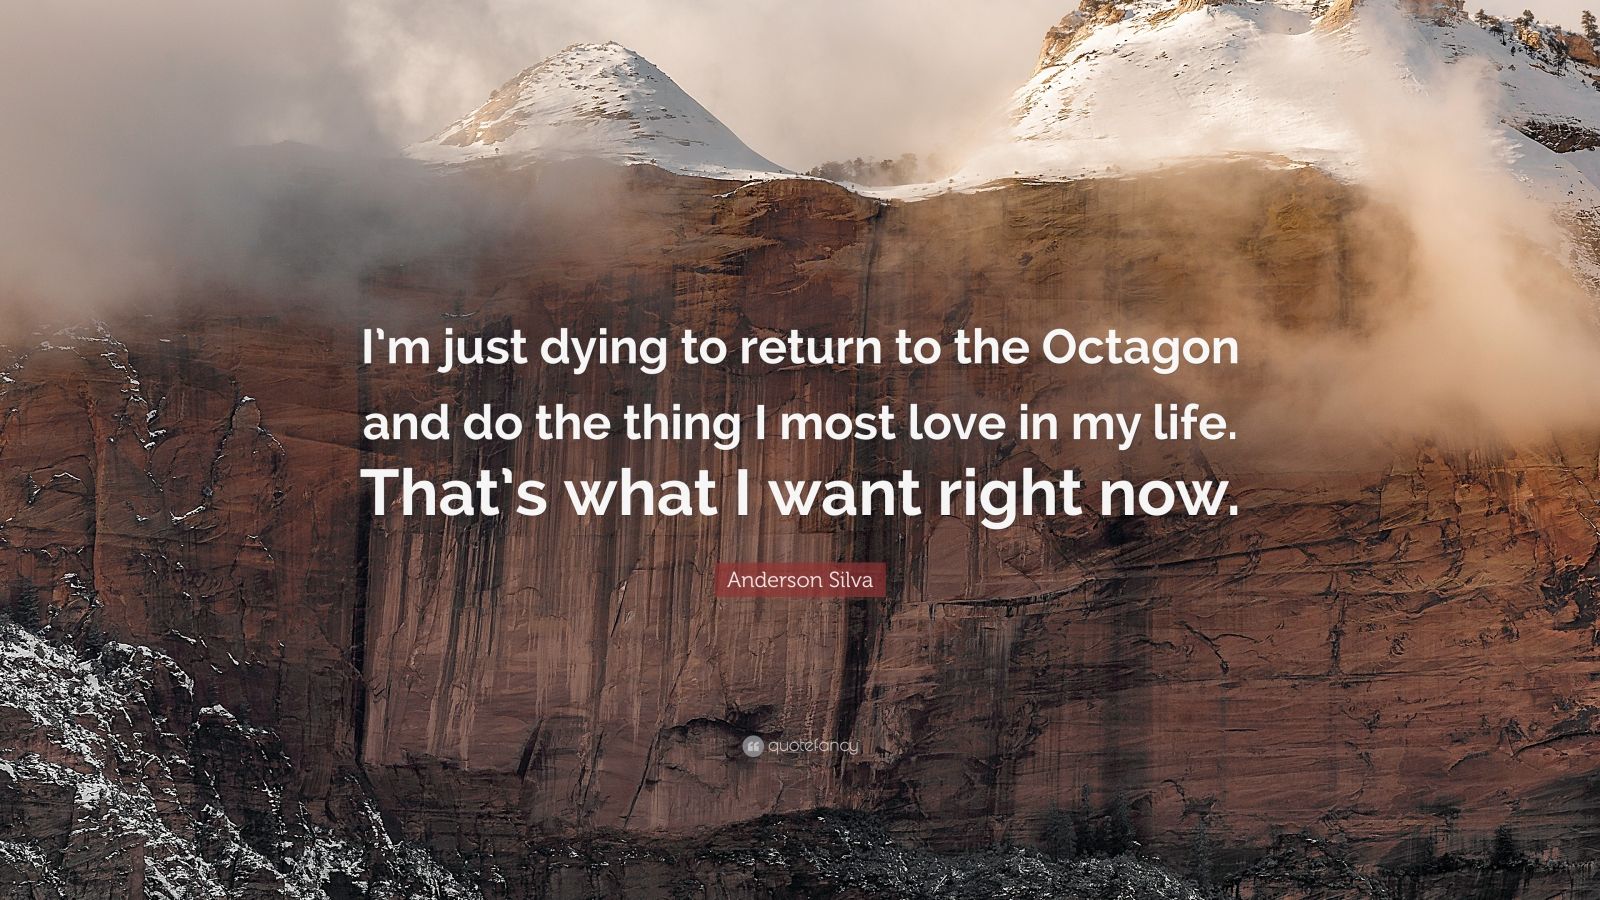 Anderson Silva Quote: "I'm just dying to return to the Octagon and do the thing I most love in ...